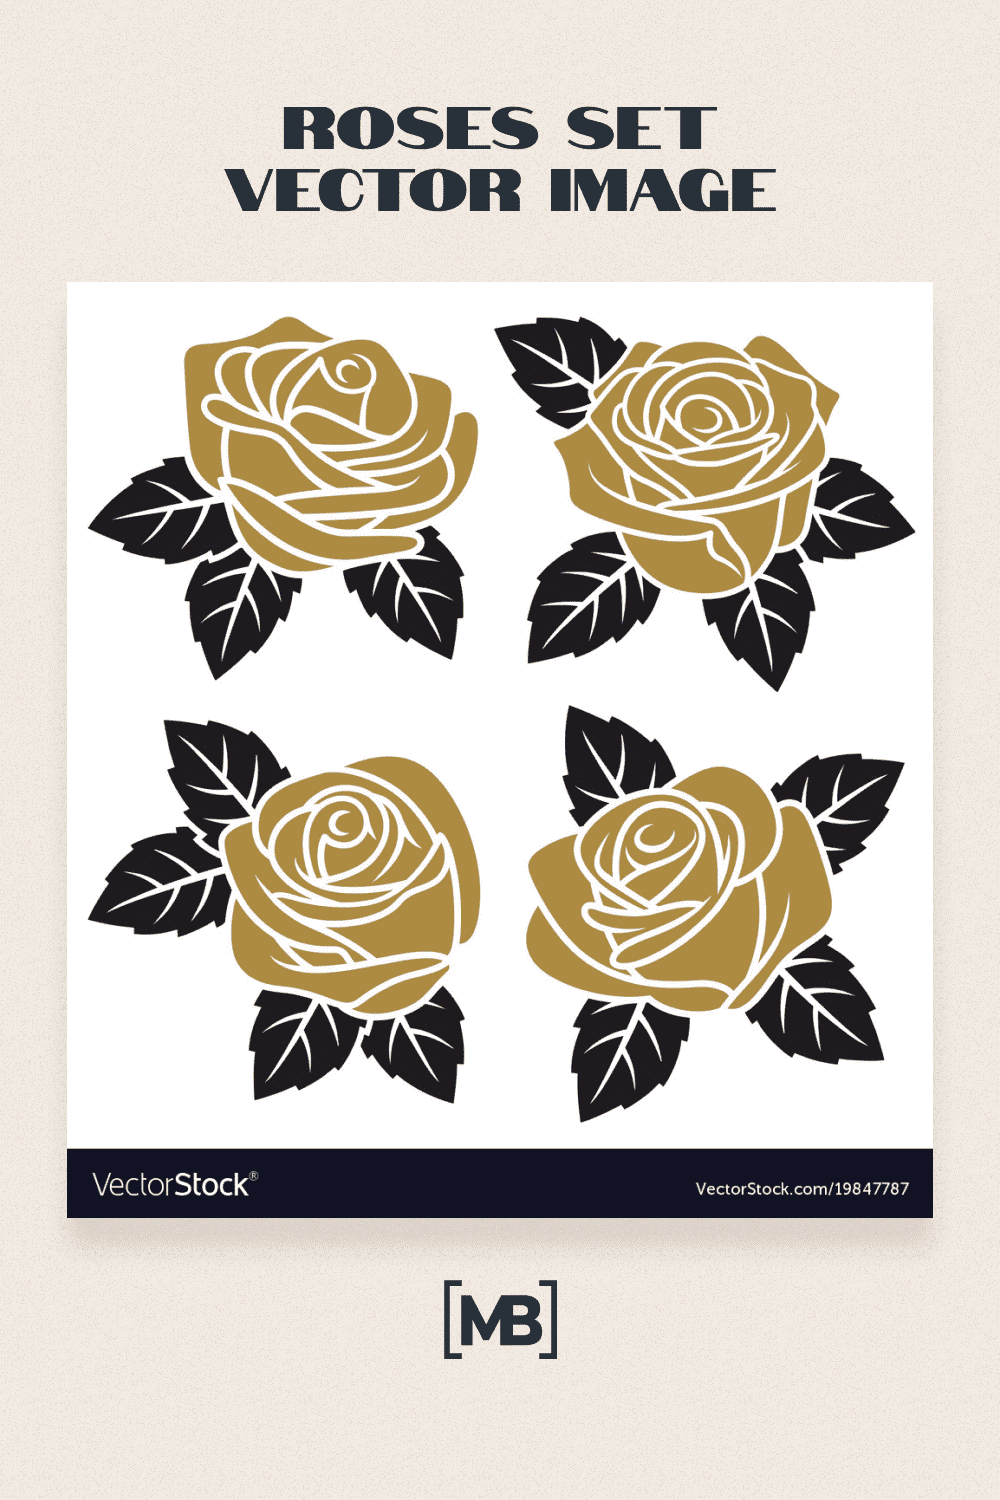 Roses set vector image.